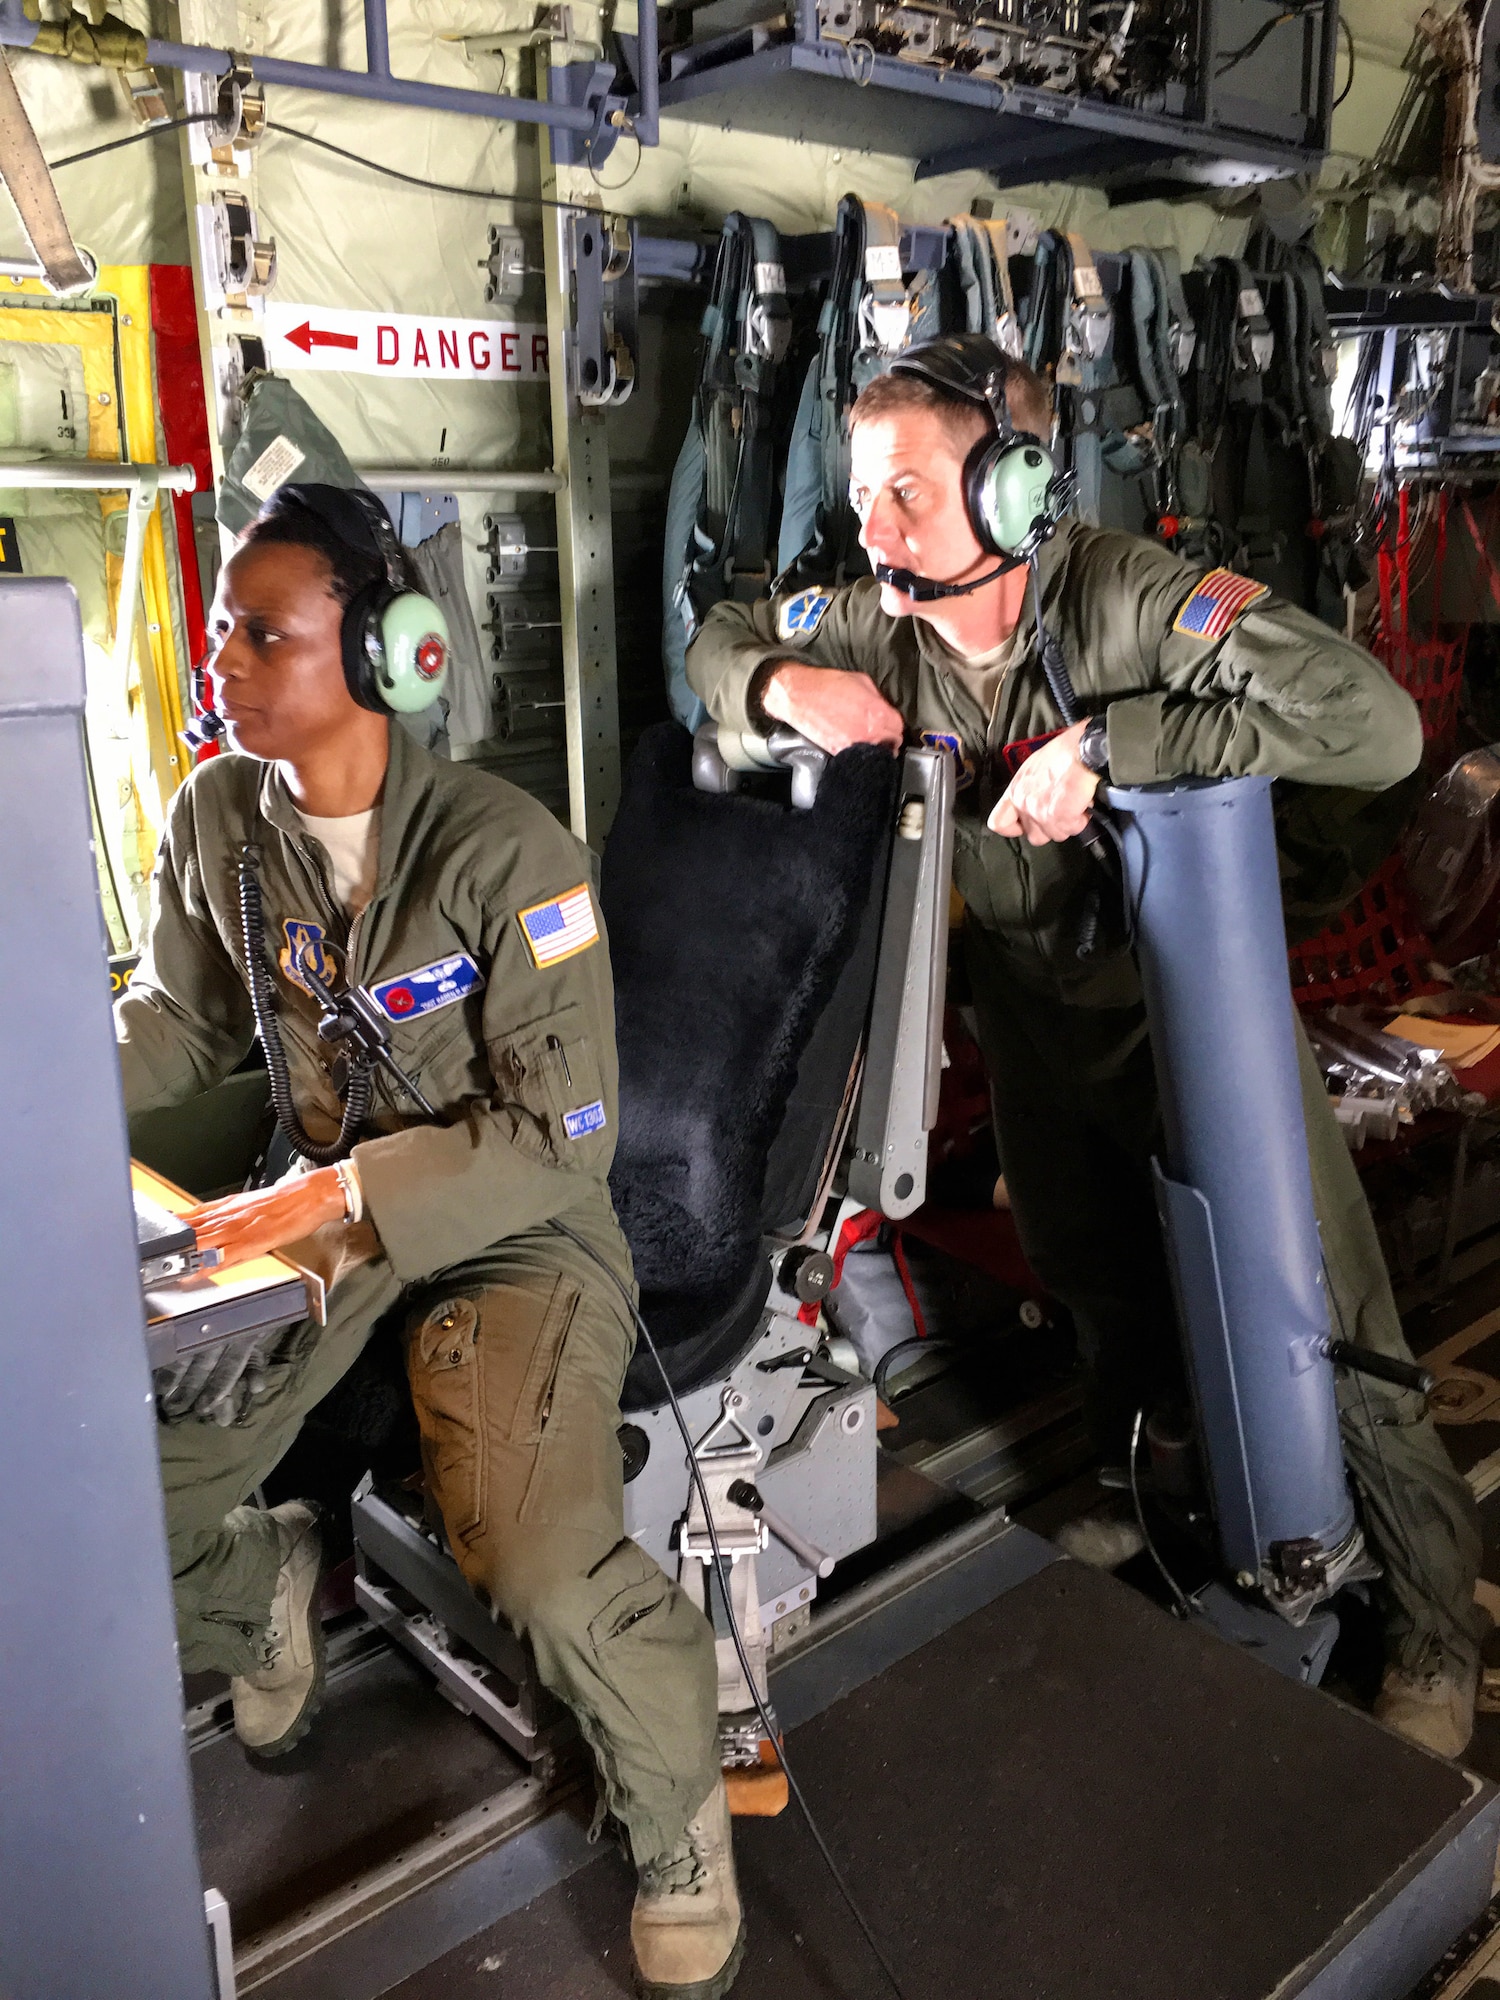 Tech. Sgt. Karen Moore and Chief Master Sgt. Rick Cumbo, 53rd Weather Reconnaissance Squadron loadmasters, analyze weather data being relayed to the aircraft by a dropsonde, a parachute-borne cylindrical instrument that collects meteorological data as it drops toward the surface of the water. The Hurricane Hunters flew several research missions Feb. 11-24, 2016, to collect meteorological data from atmospheric rivers above the Pacific to assist in improving West Coast weather forecasts. (U.S. Air Force photo/Capt. Kimberly Spusta) 
